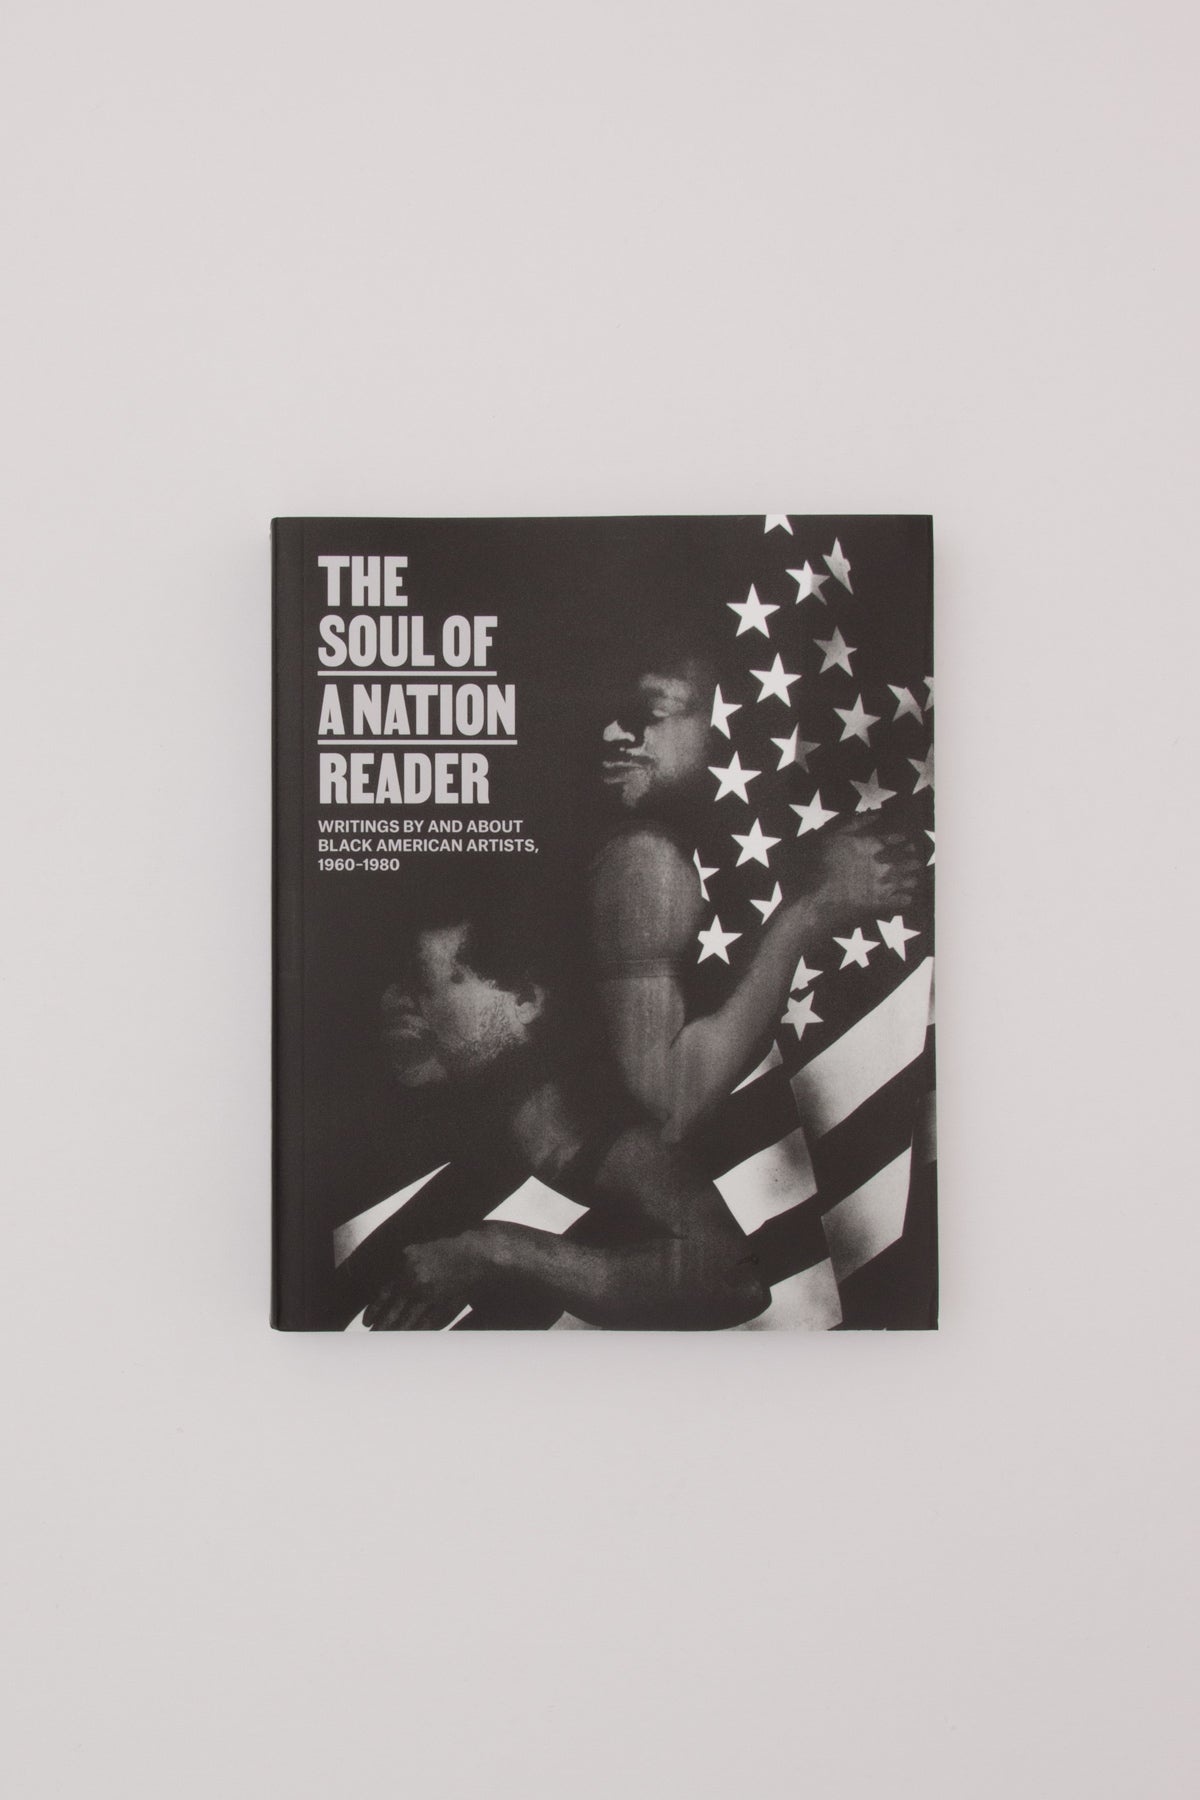 The Soul of a Nation Reader: Writings by and about Black American Artists, 1960-1980 - Mark Godfrey ed.